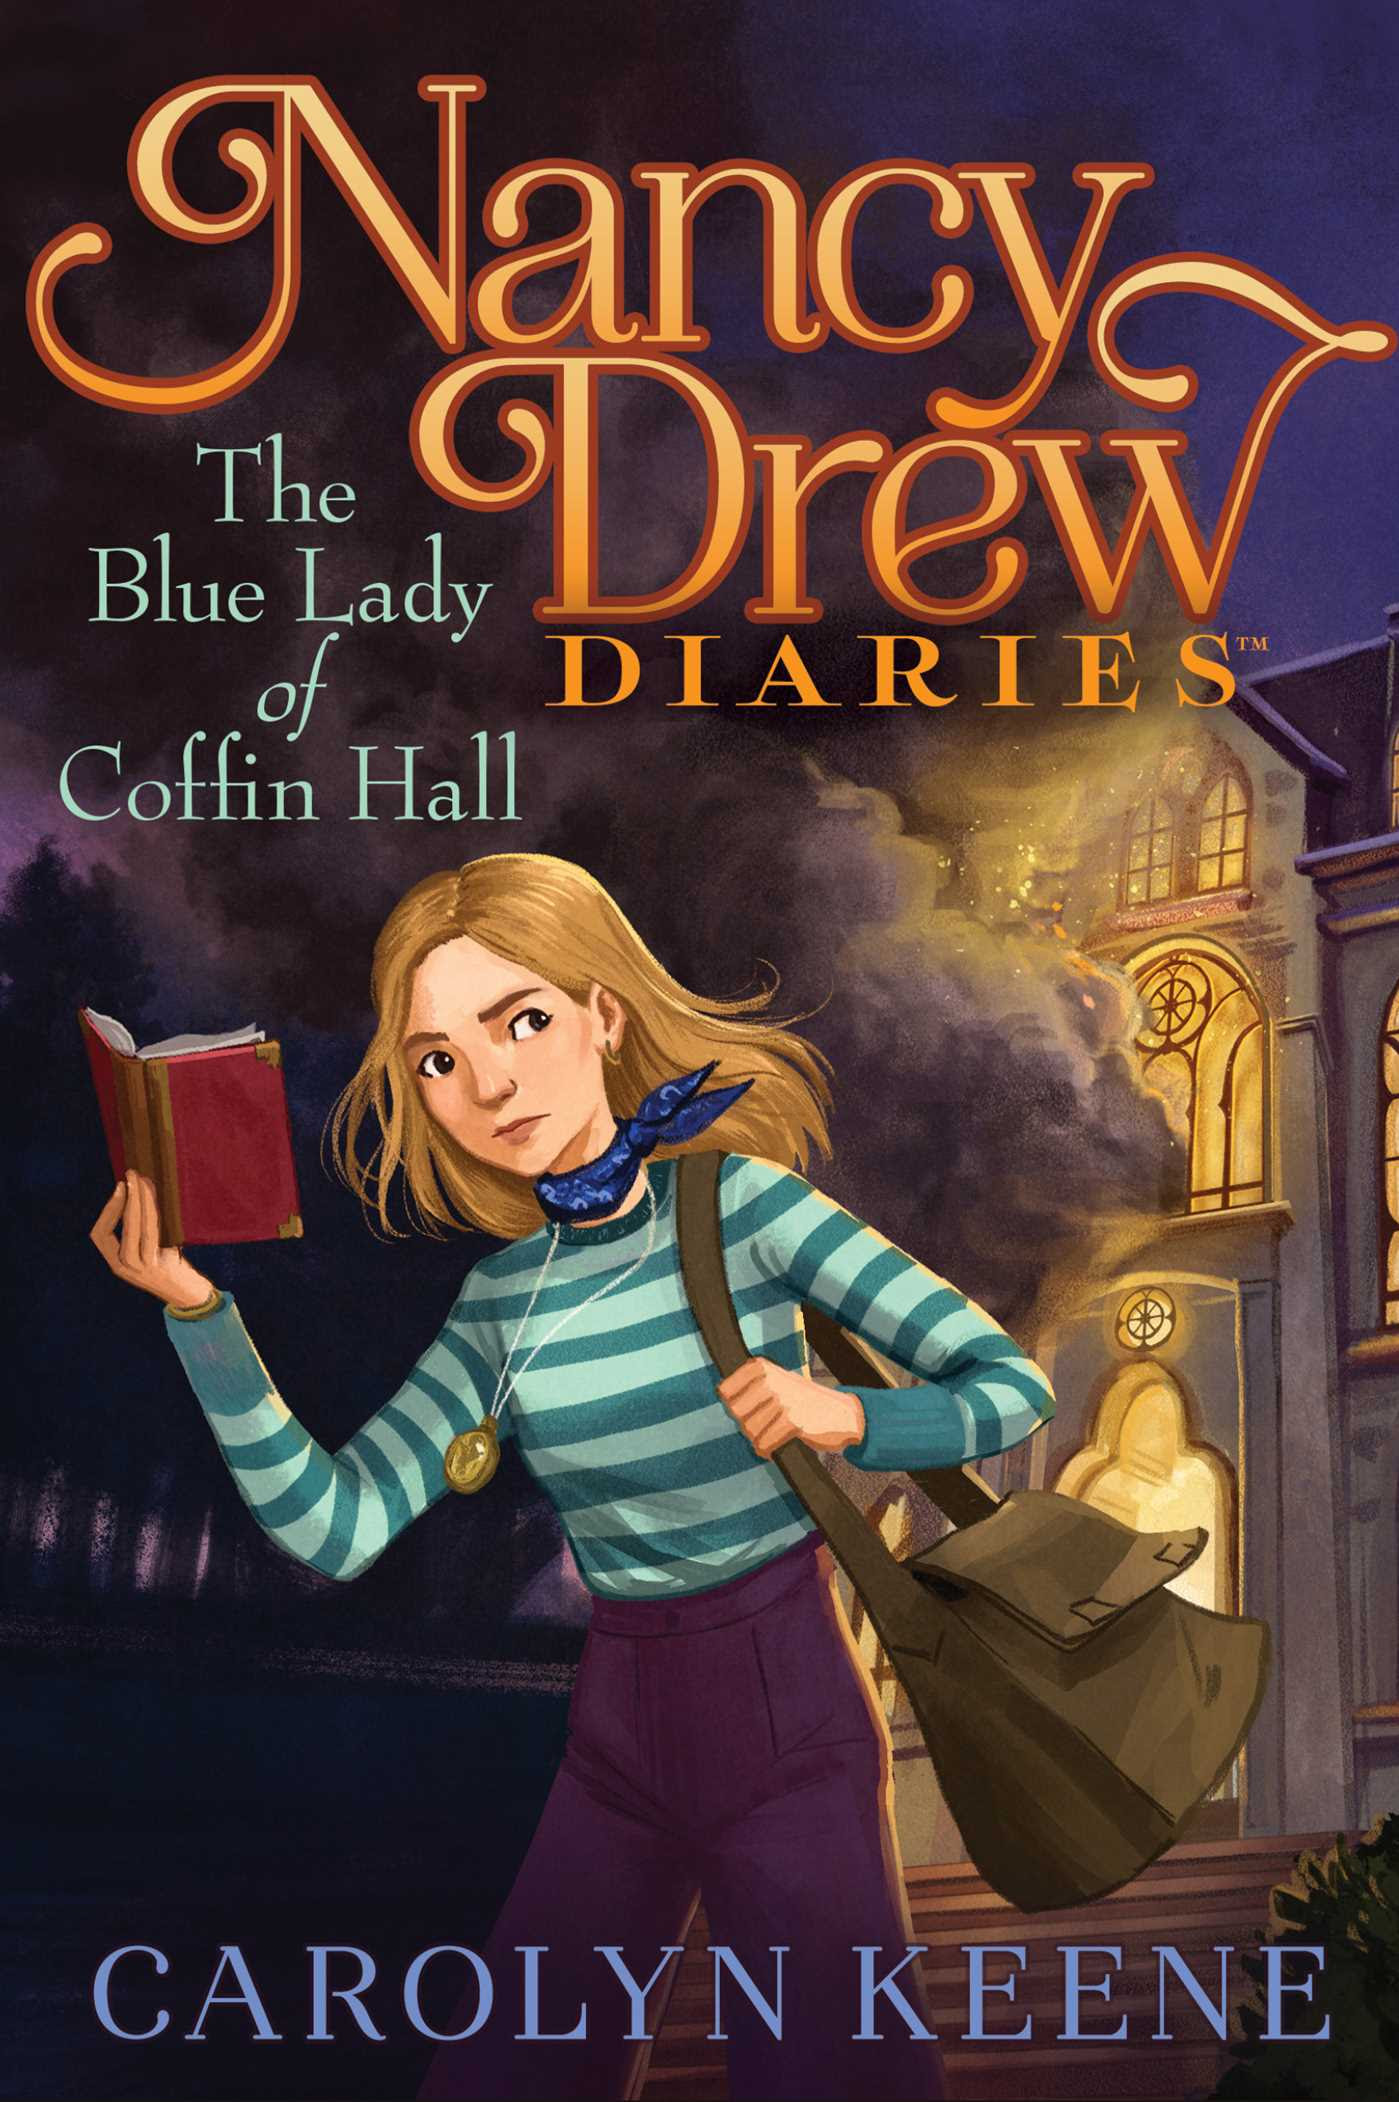 The Blue Lady of Coffin Hall PDF